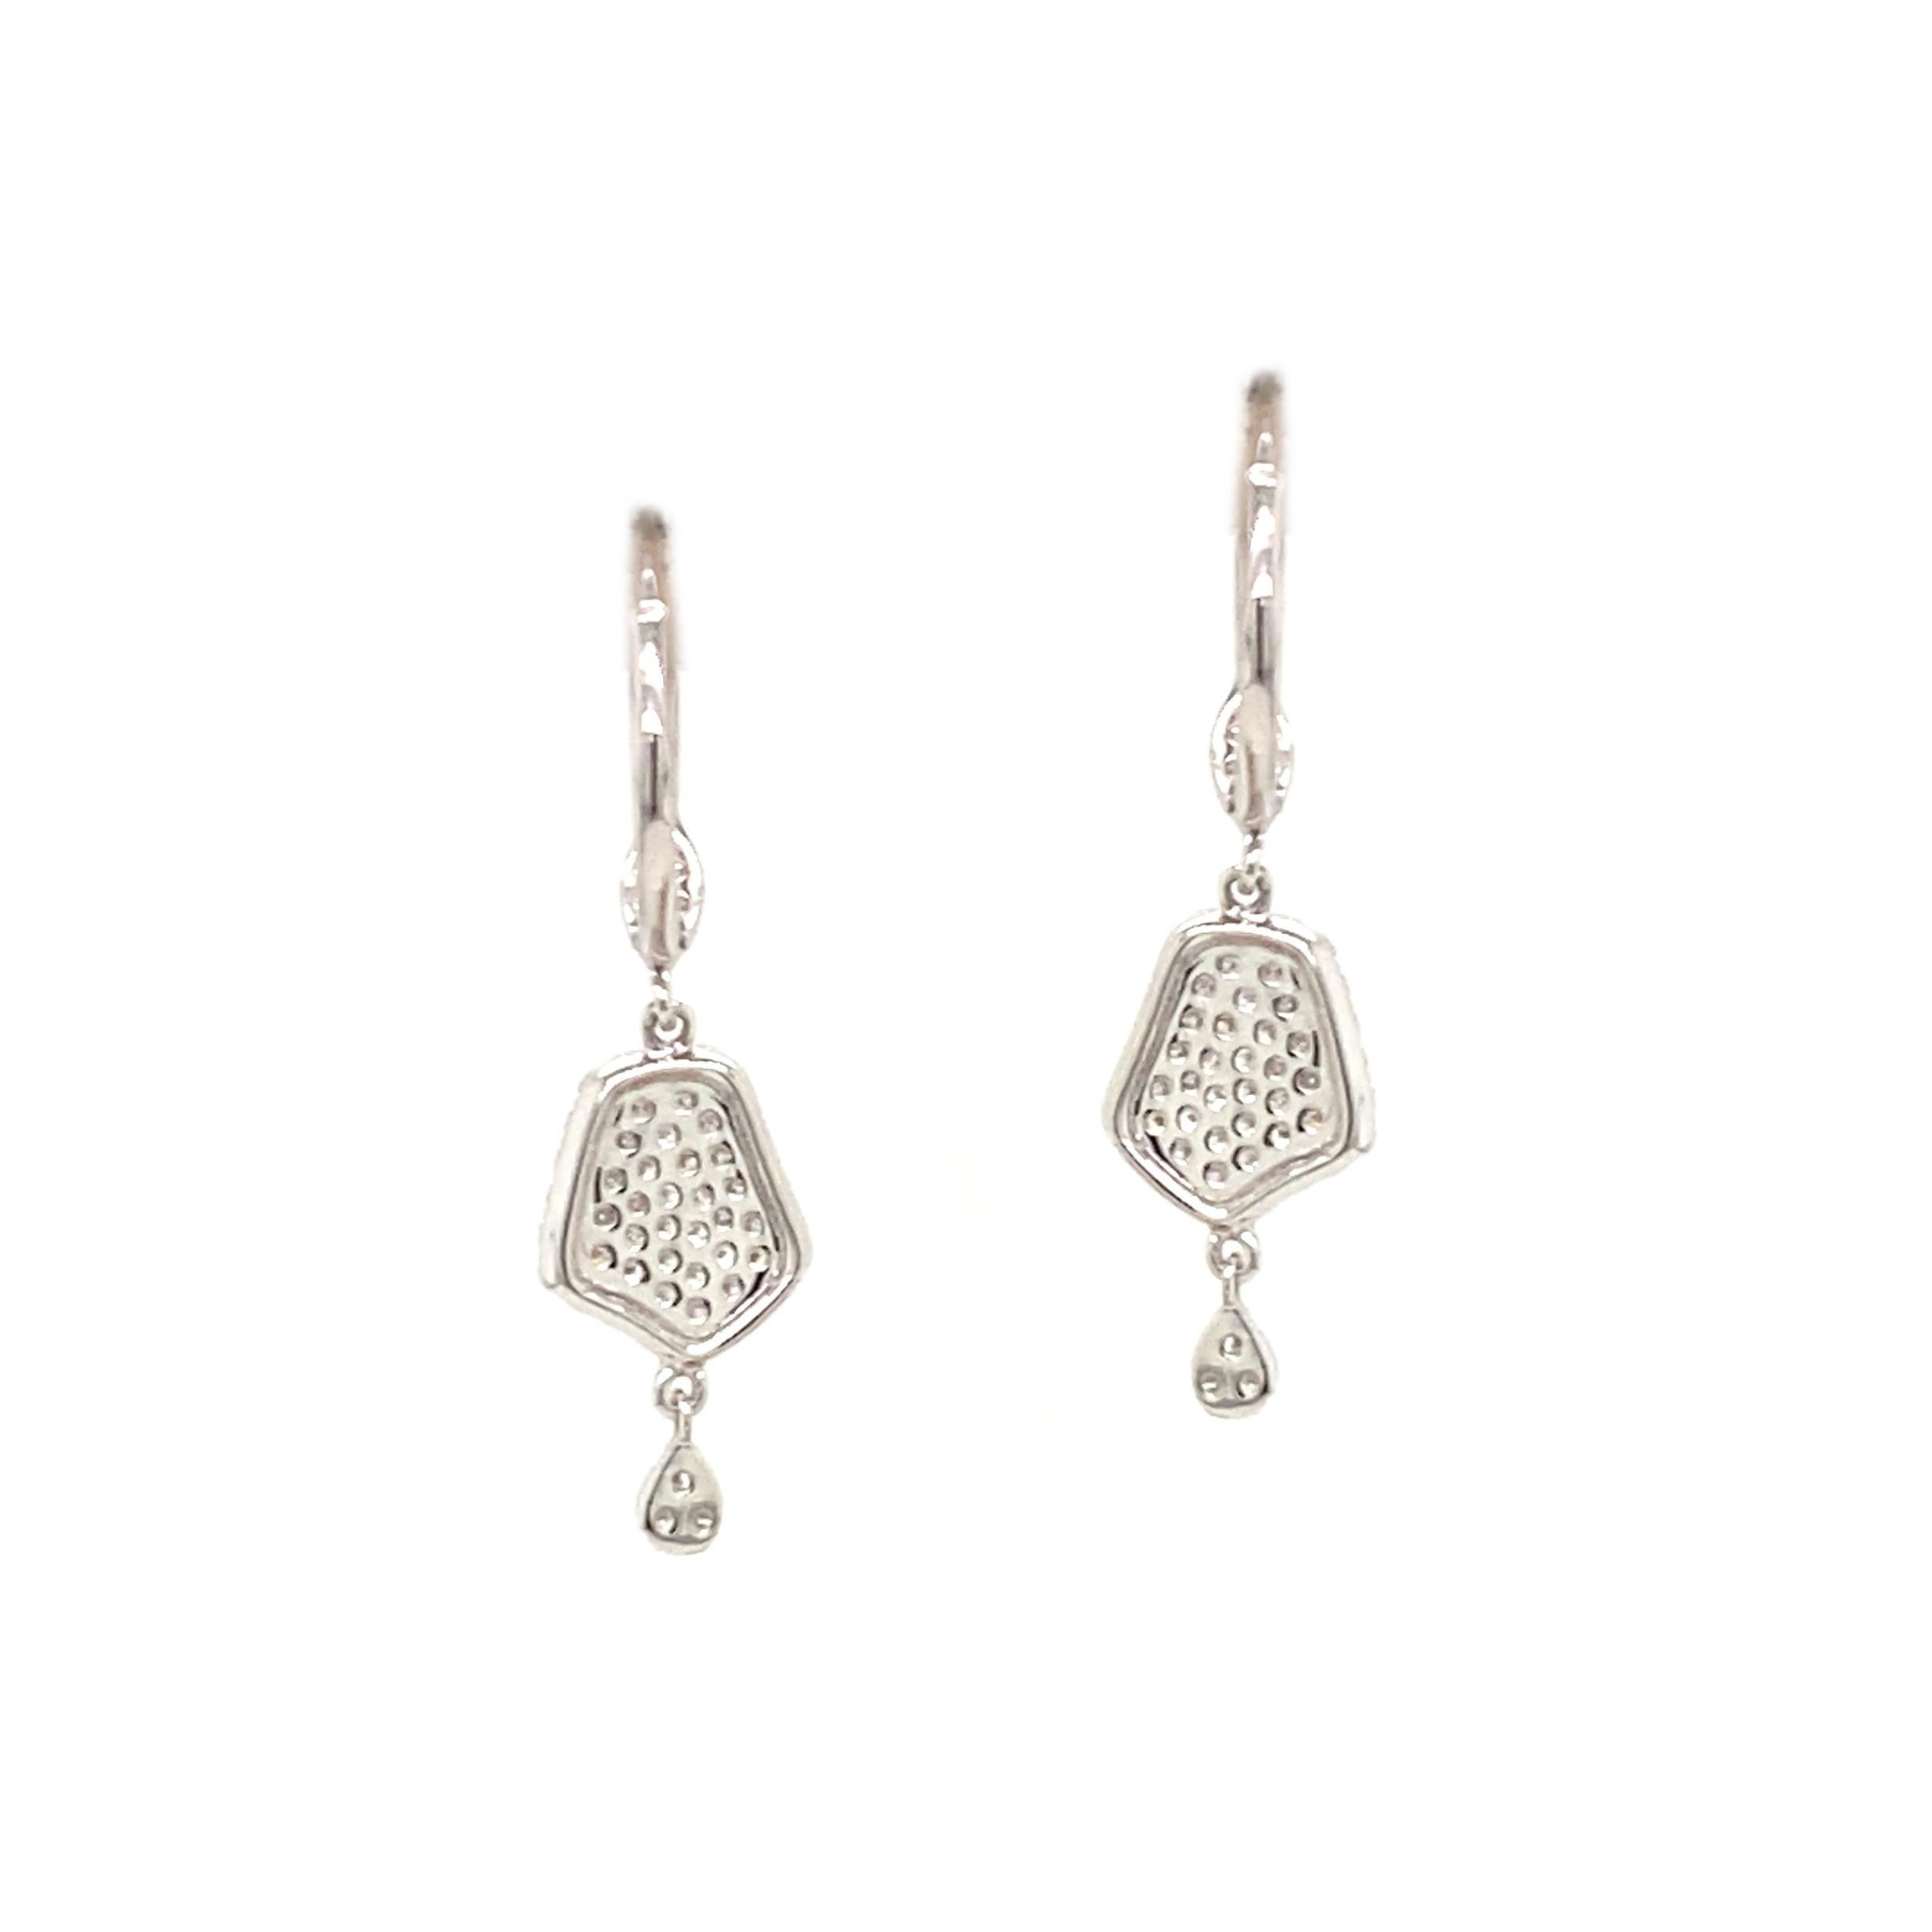 Feminine pave drop earrings with fluid movement with2 different drops.
14 Karat white gold
172 Round diamonds .45 Carat Total Weight  G-H/ SI1
Leverback
14